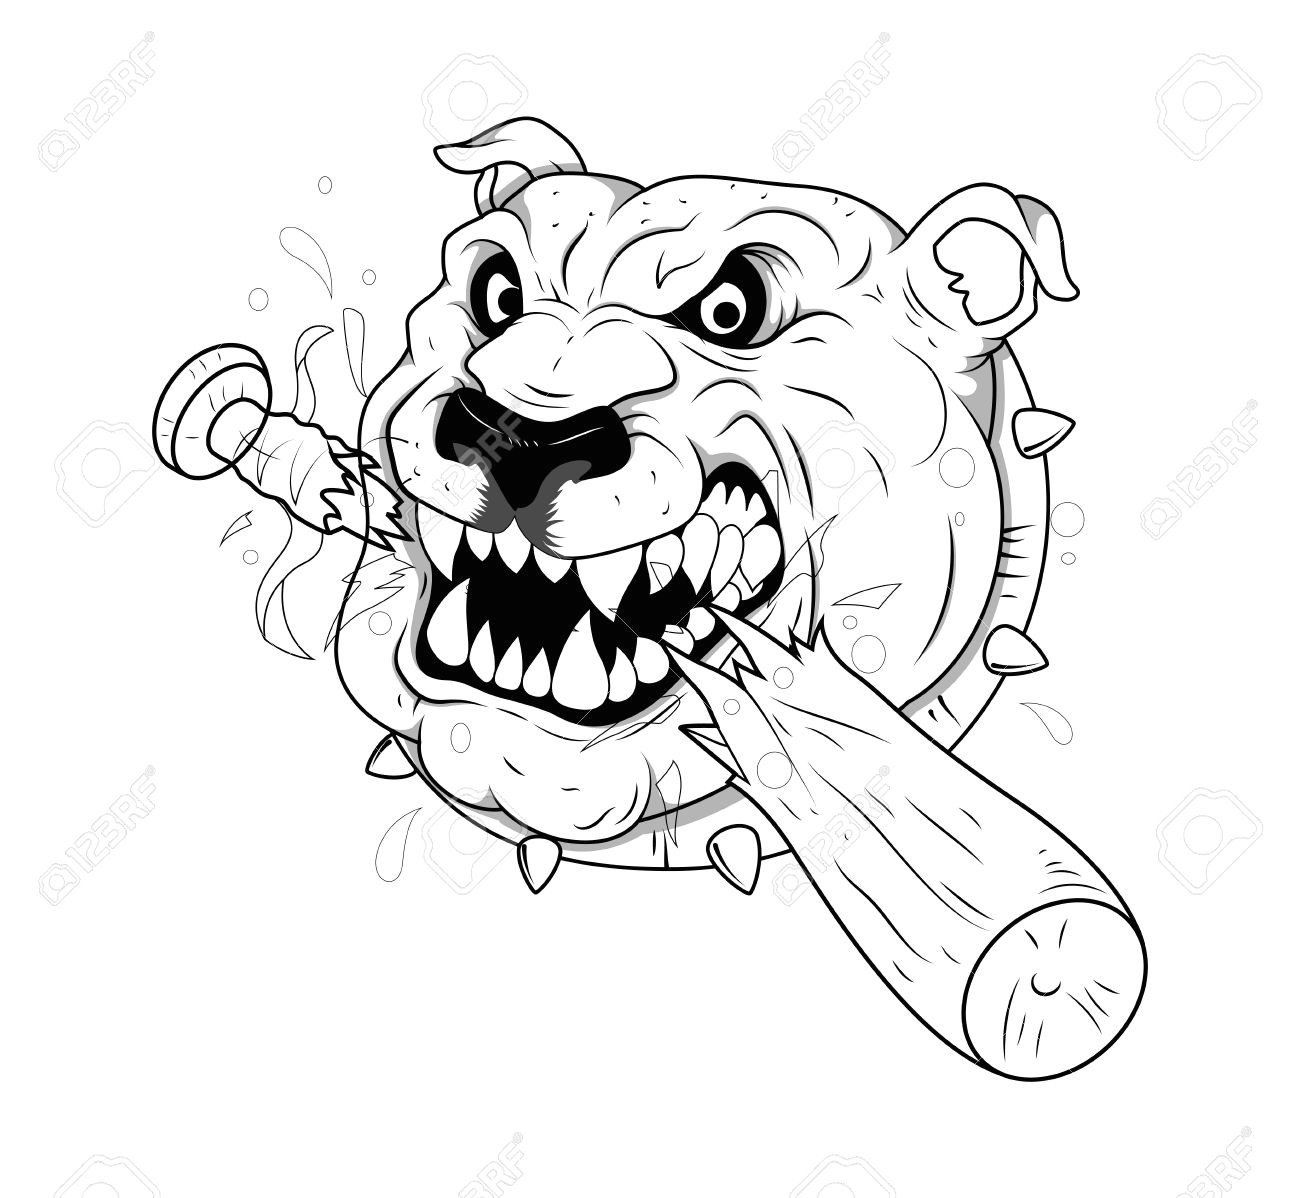 Drawing Of A Dangerous Dog Dog Tattoo Vector Royalty Free Cliparts Vectors and Stock